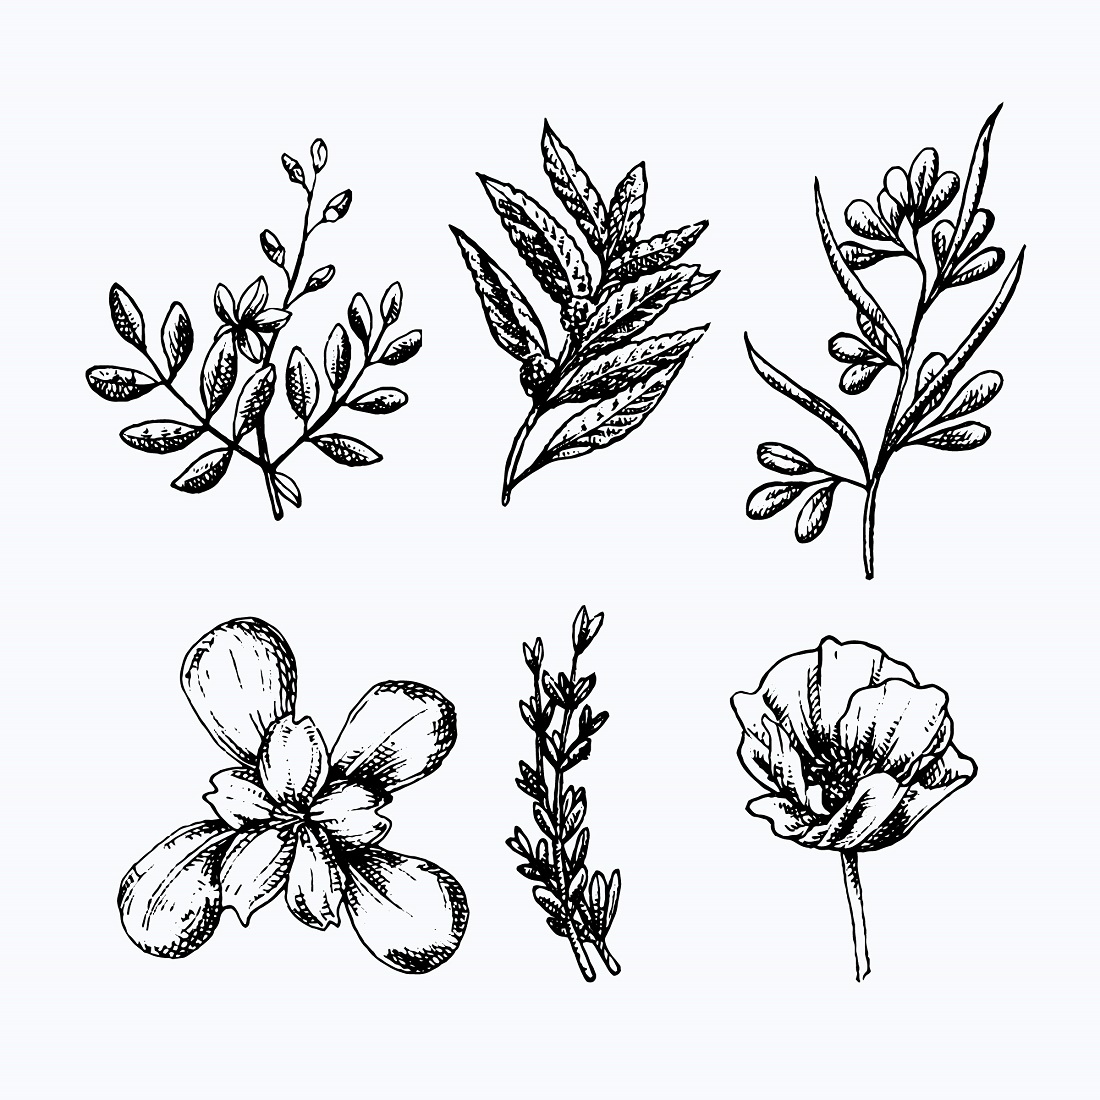 Realistic hand drawn herbs wild flowers preview image.